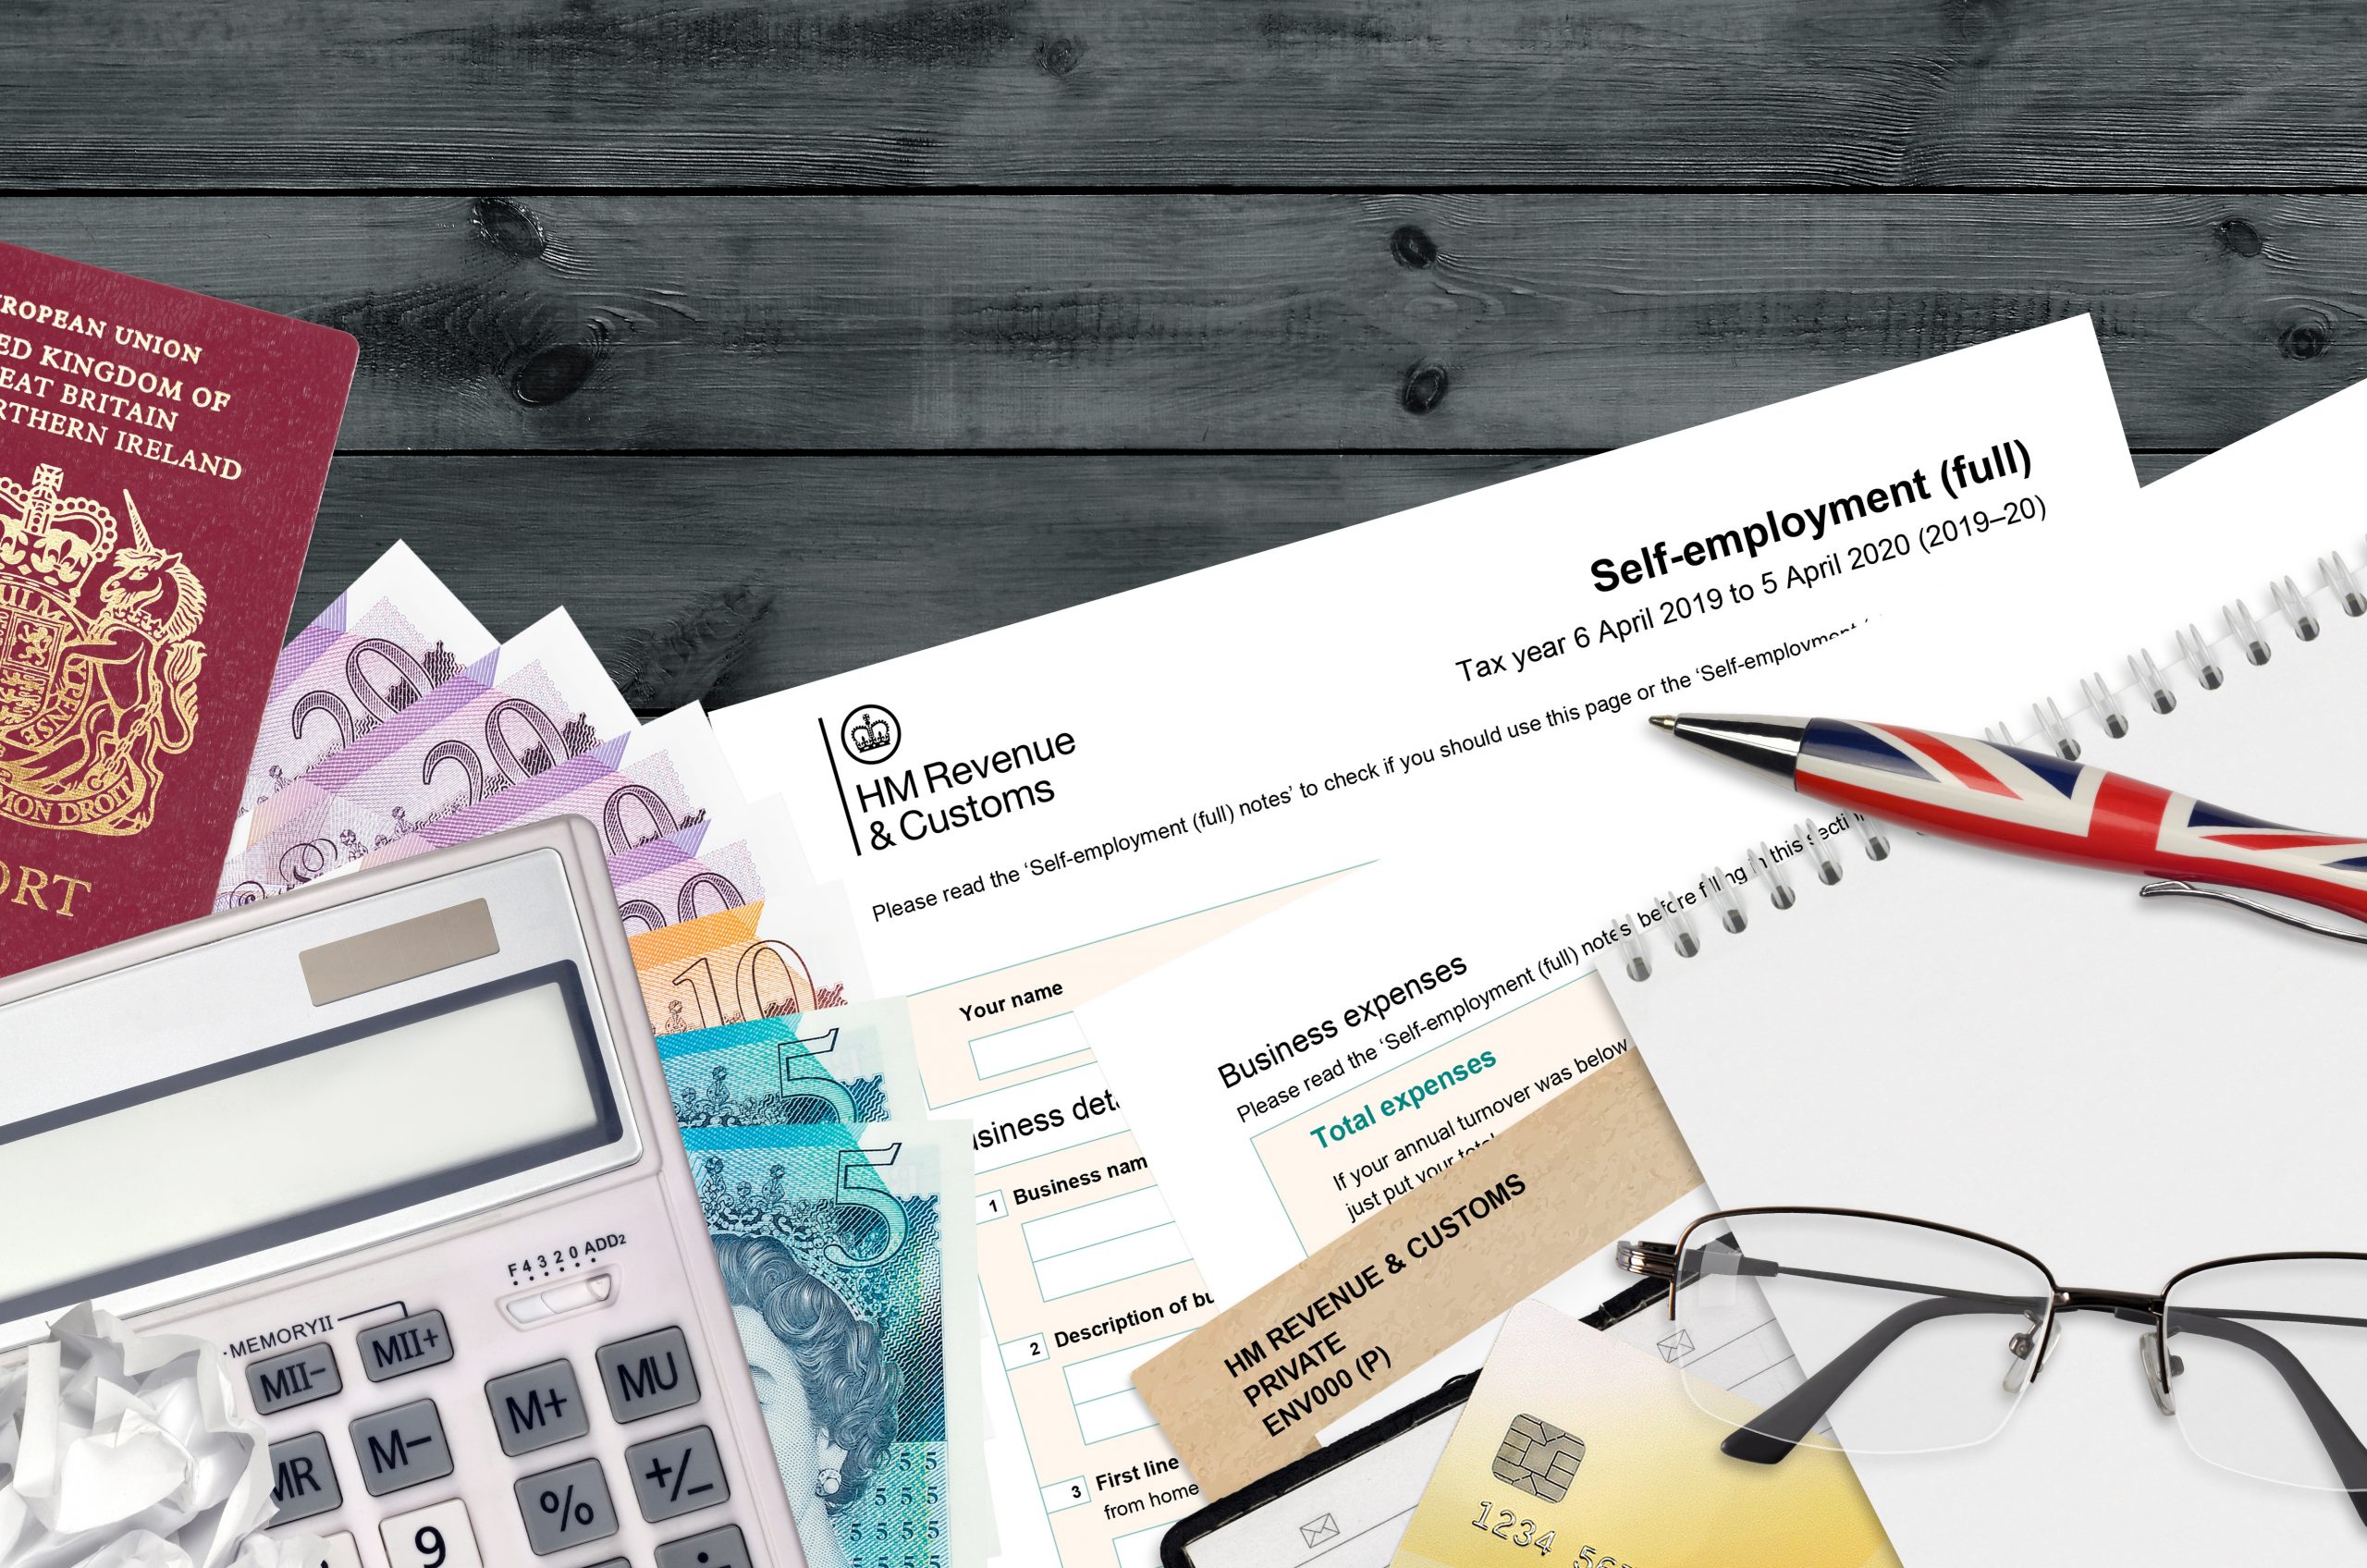 HMRC waives self assessment penalties for one month to ease COVID-19 pressures